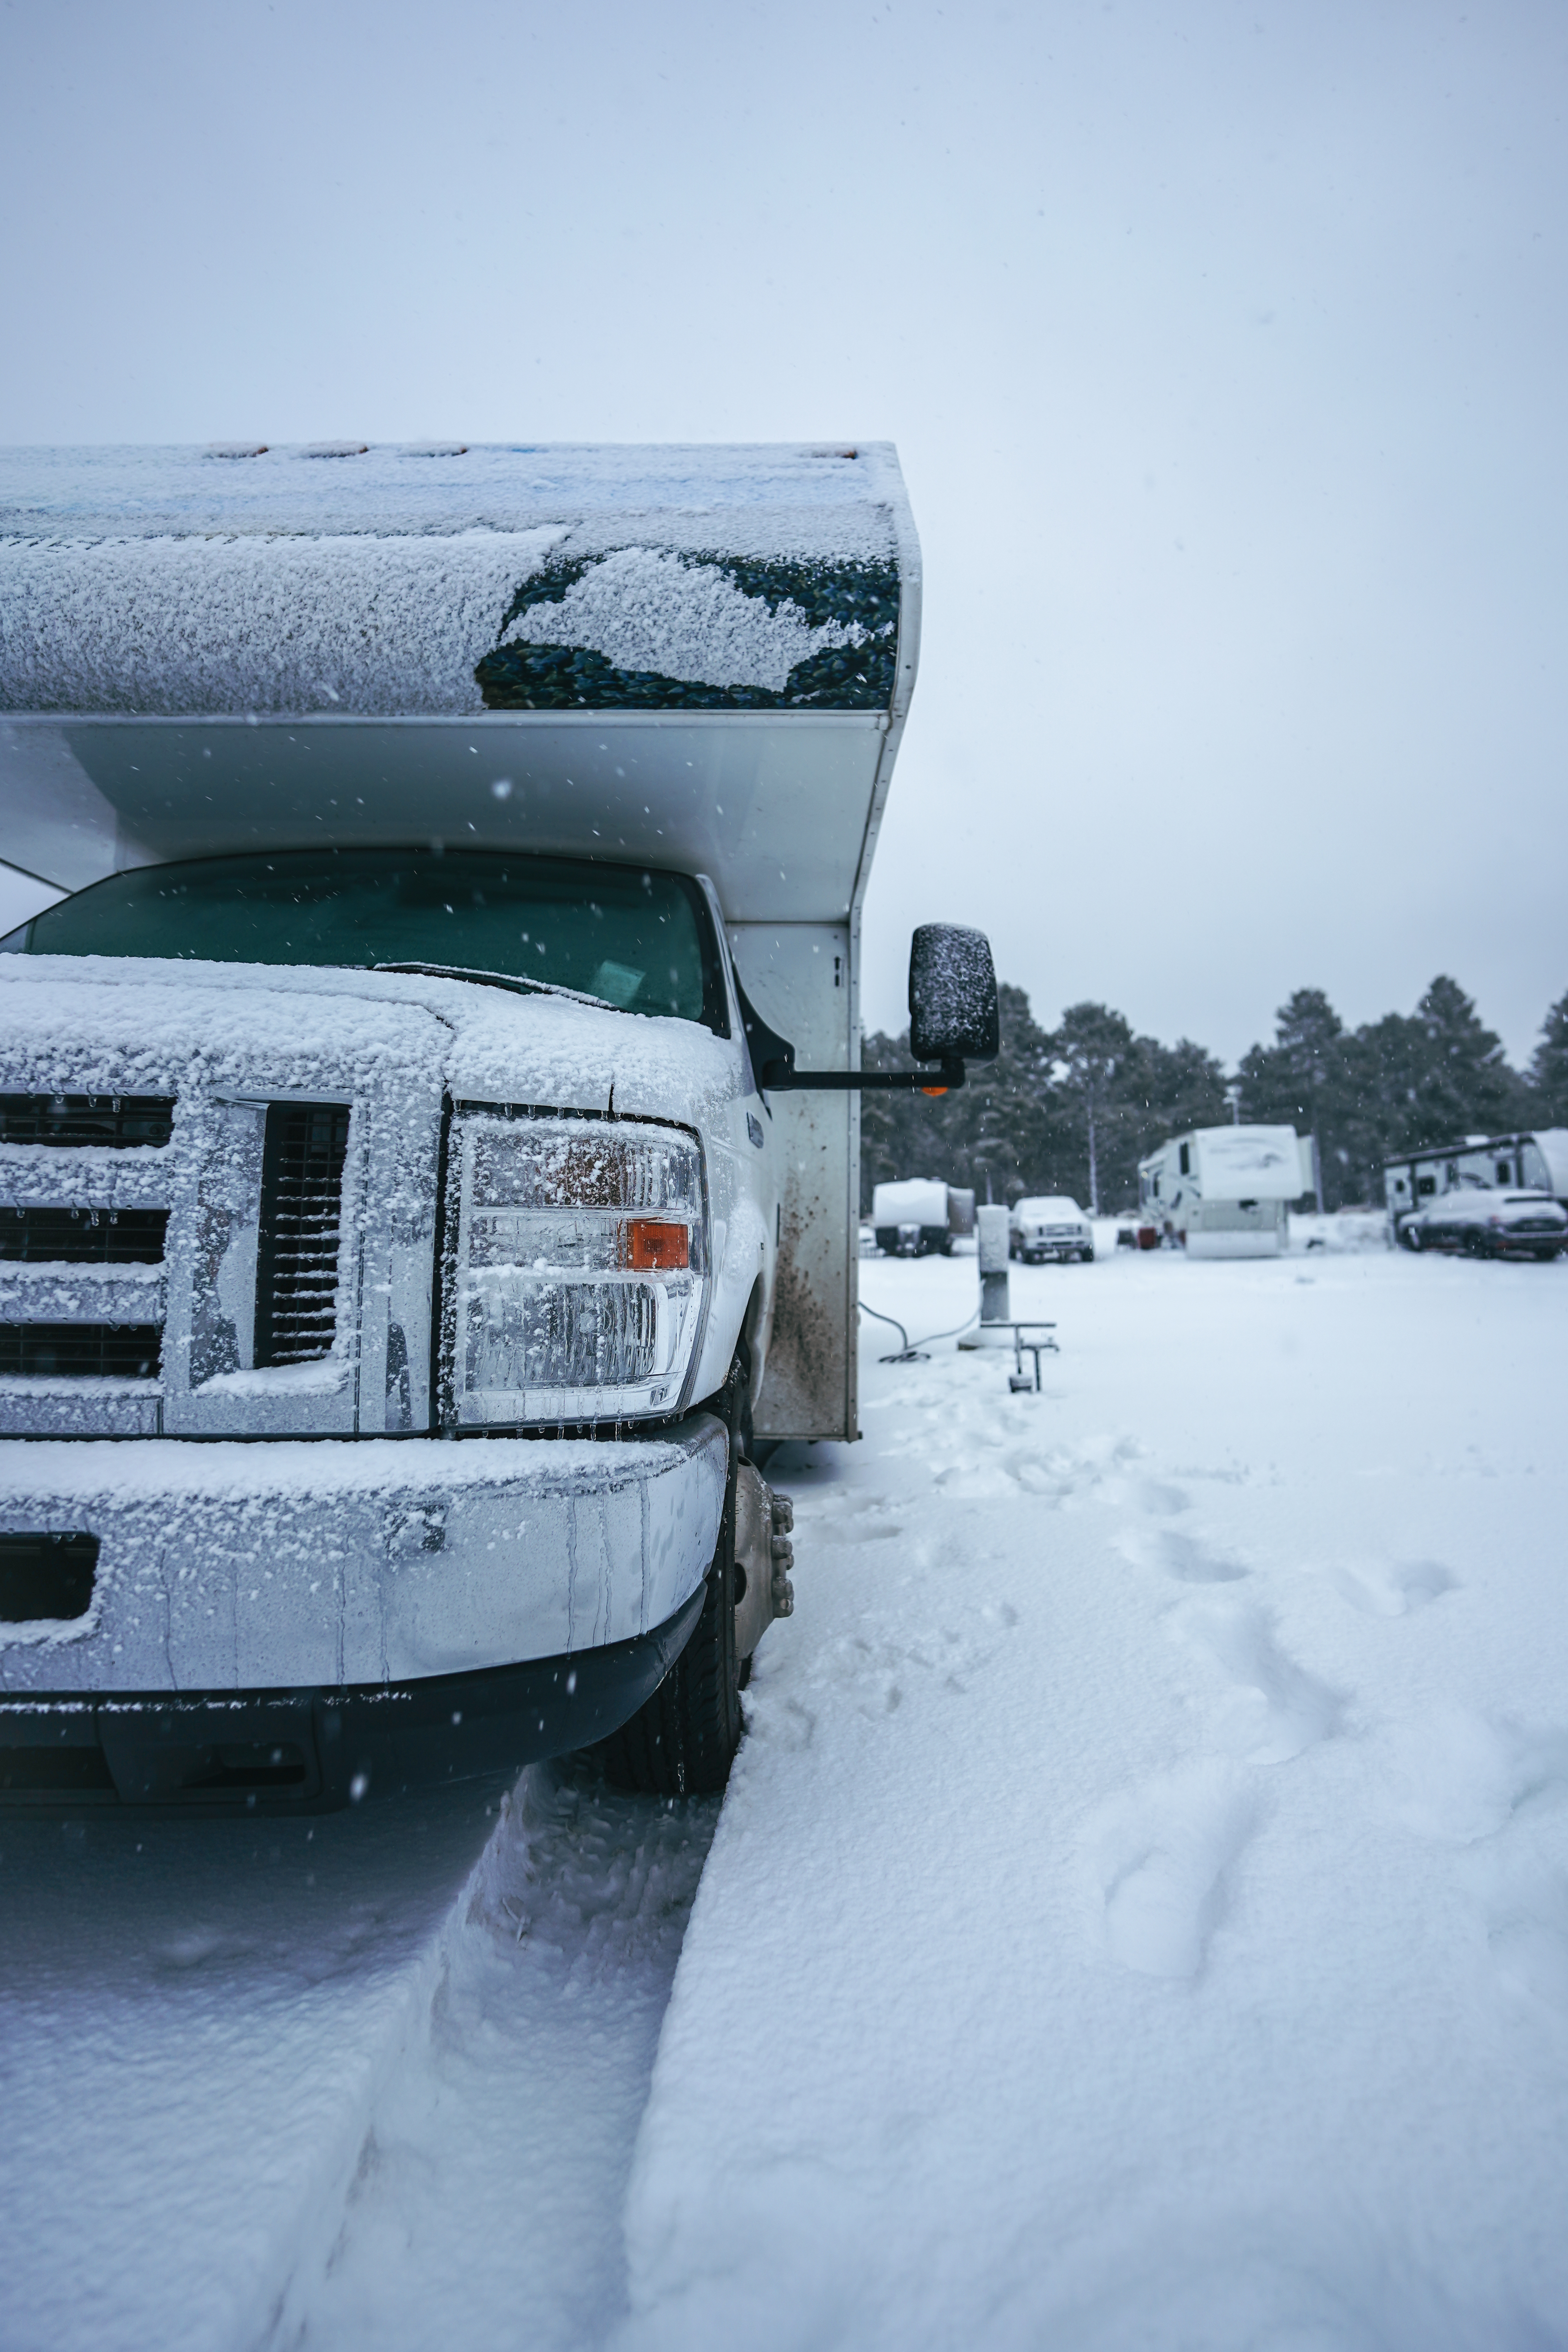 A truck camper parked in an area with foot-thick snow.